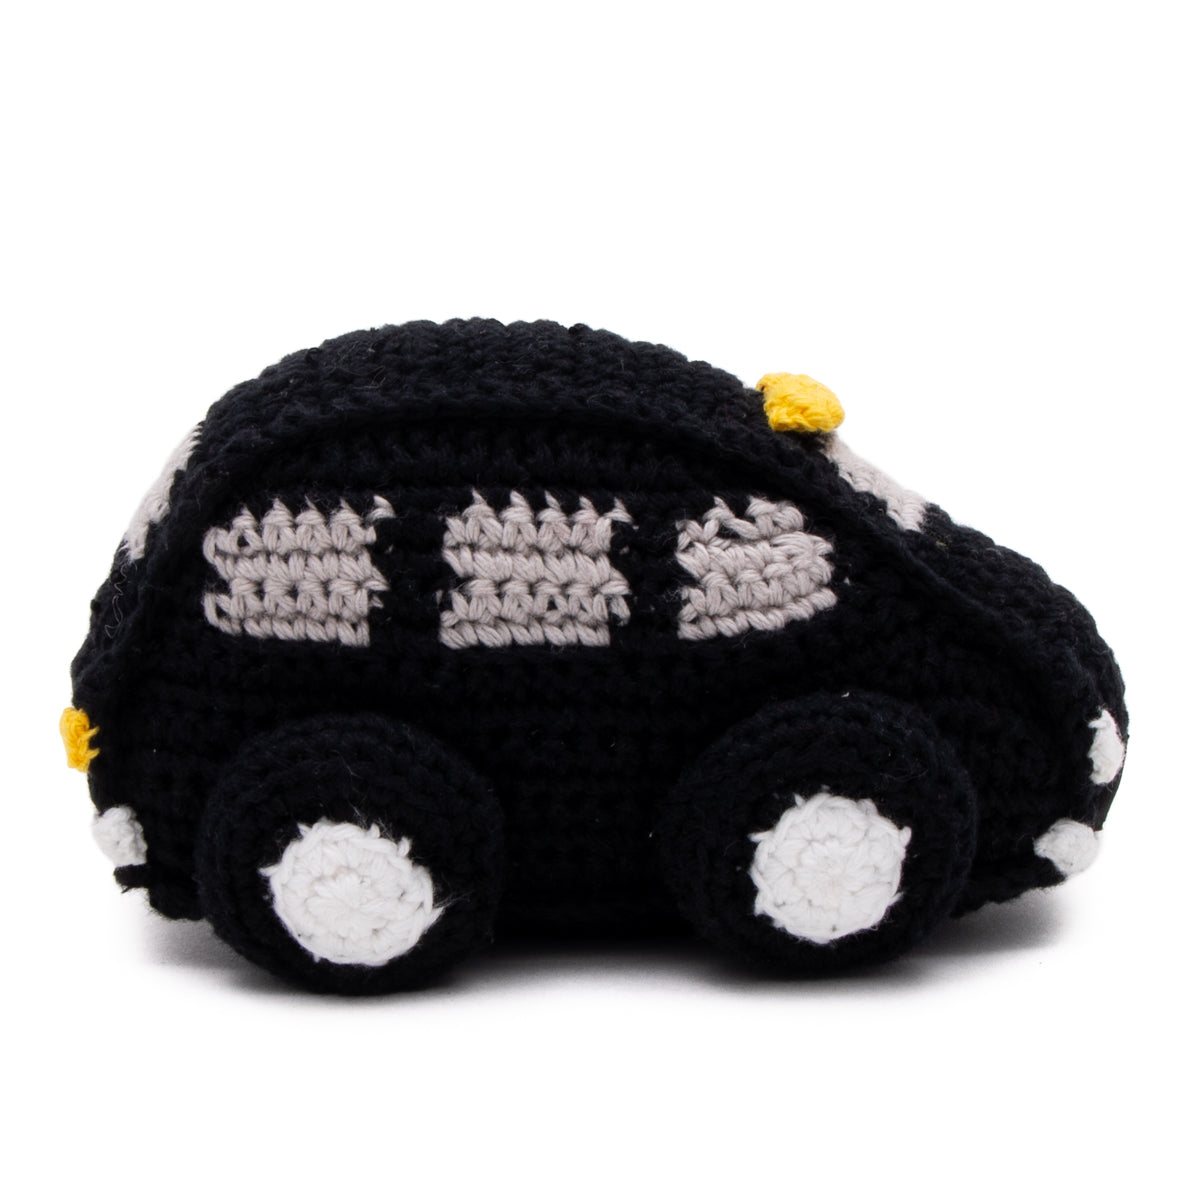 Black Cab Crochet Baby Toy With Rattle 2